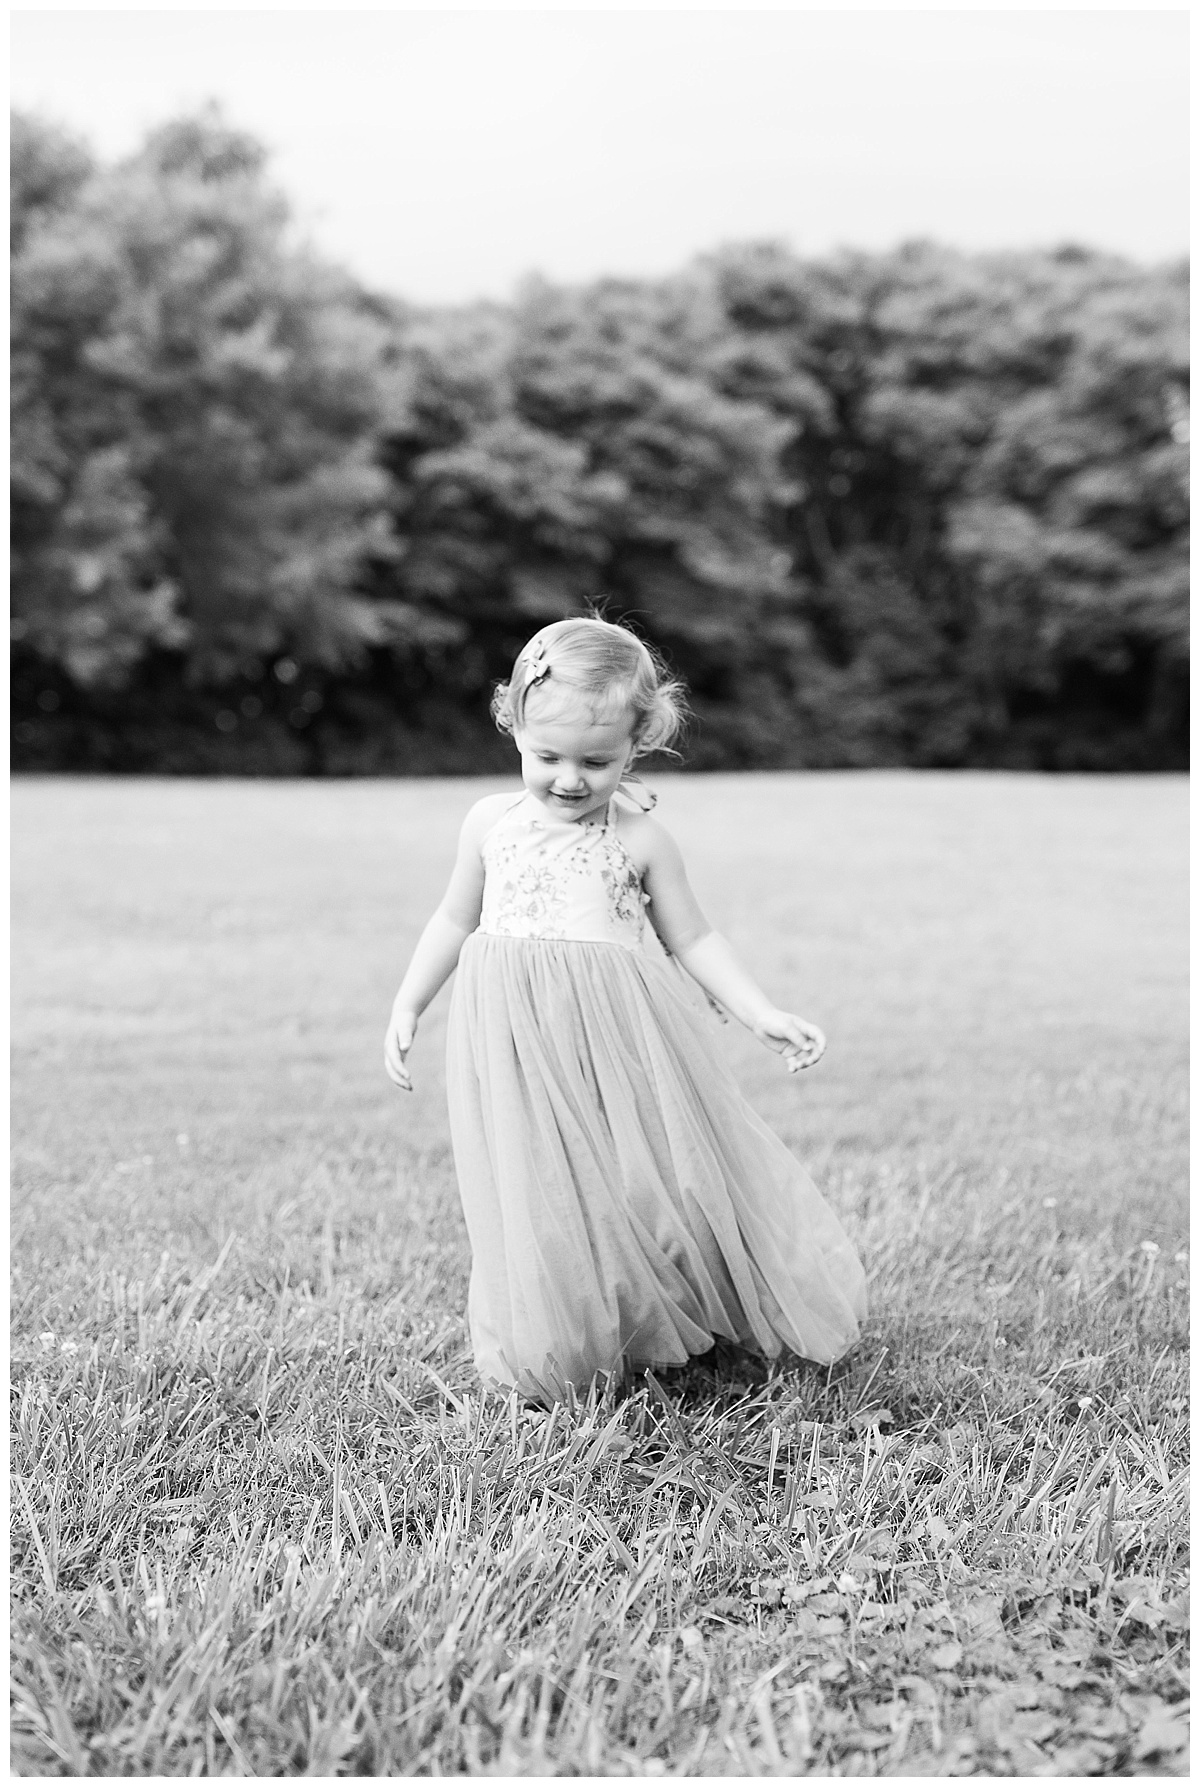 City Point Hopewell, Tri-Cities Photographer, Prince George Photographer, Prince George Virginia, Virginia Family Photographer, Family Photographer, Maternity Photographer, Maternity Pictures, Caiti Garter Photography